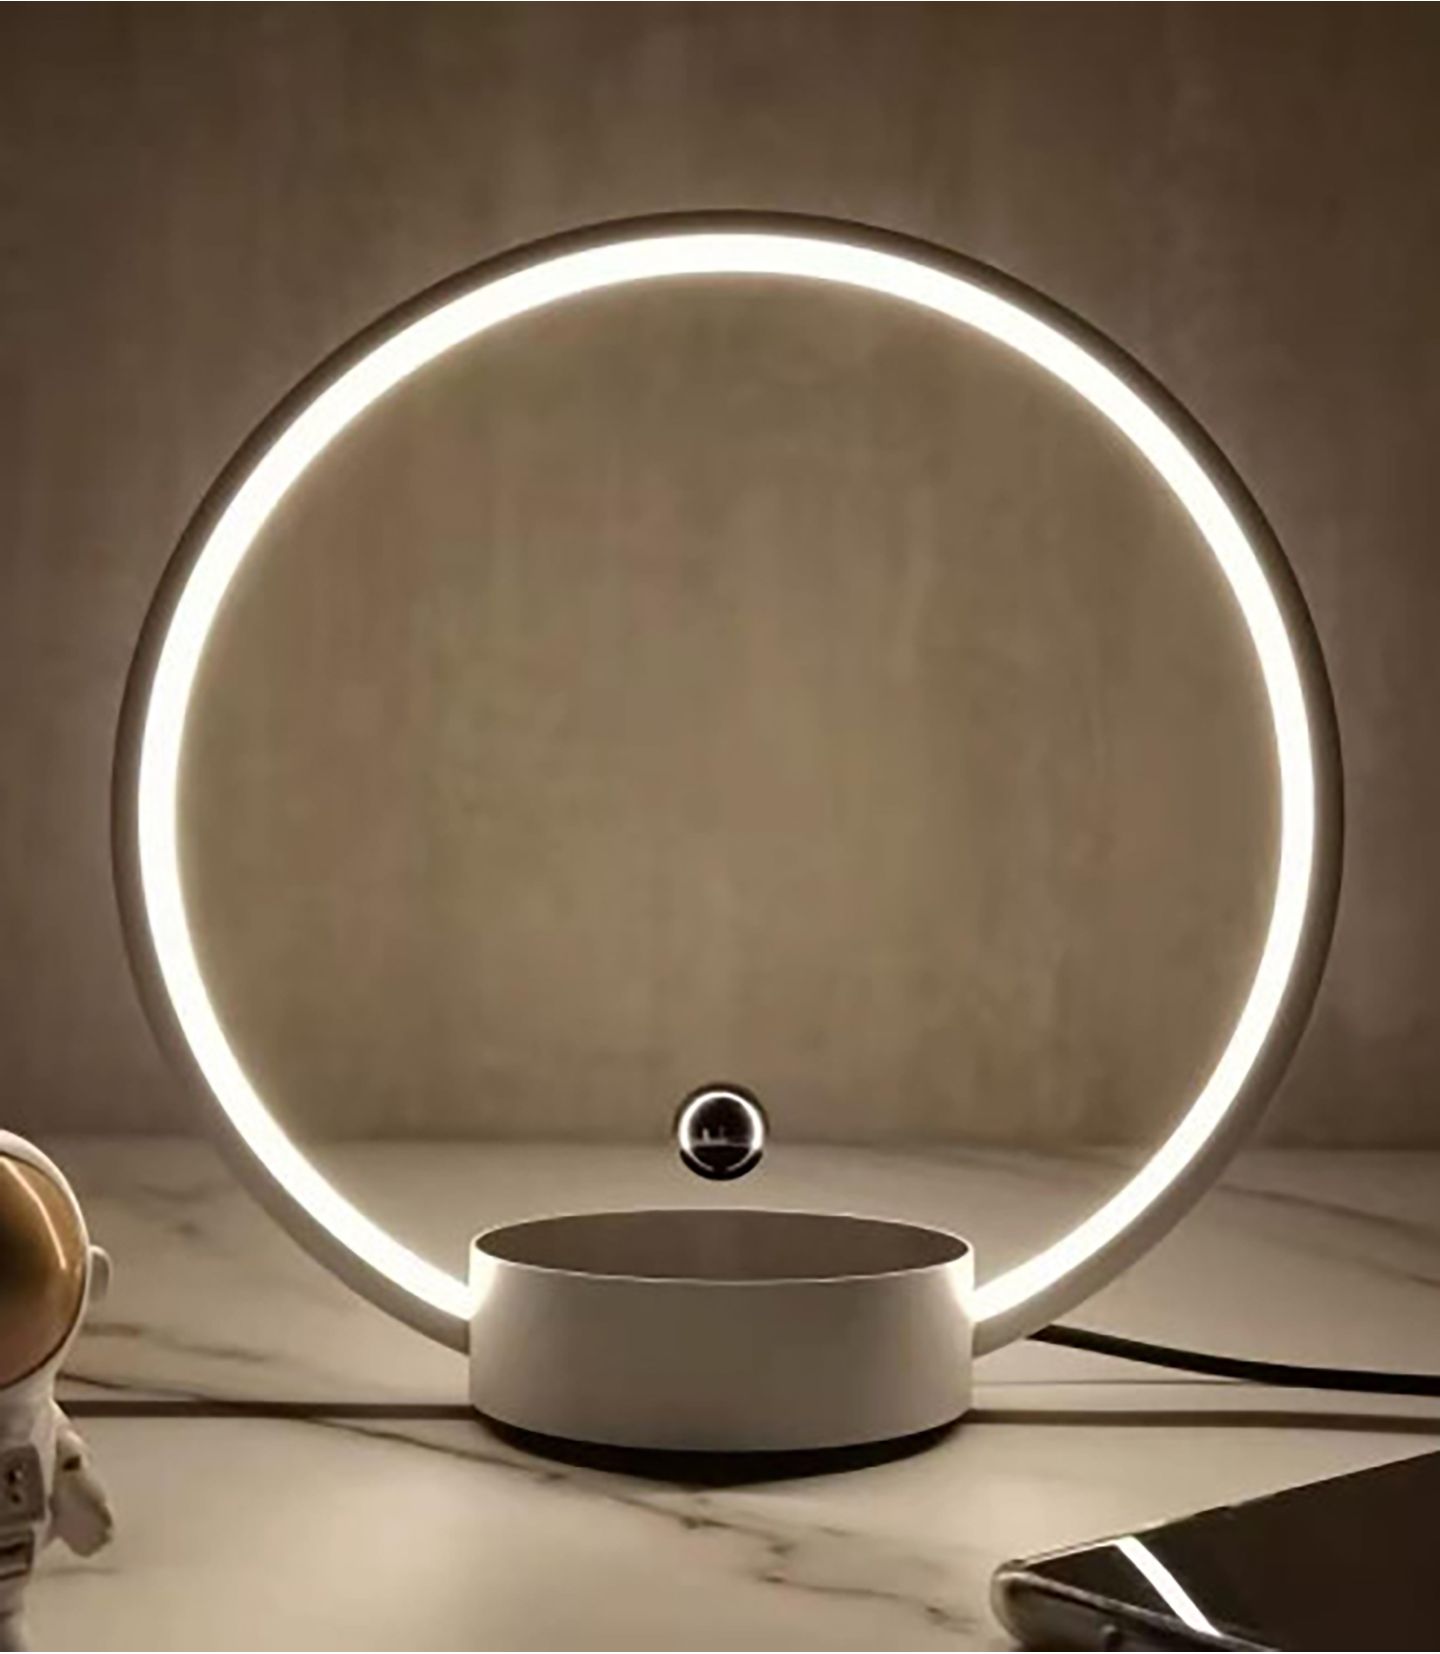 https://www.equascience.com/8443-product_hd/lampe-led-circlo-base-couleur-blanche-satinee.jpg